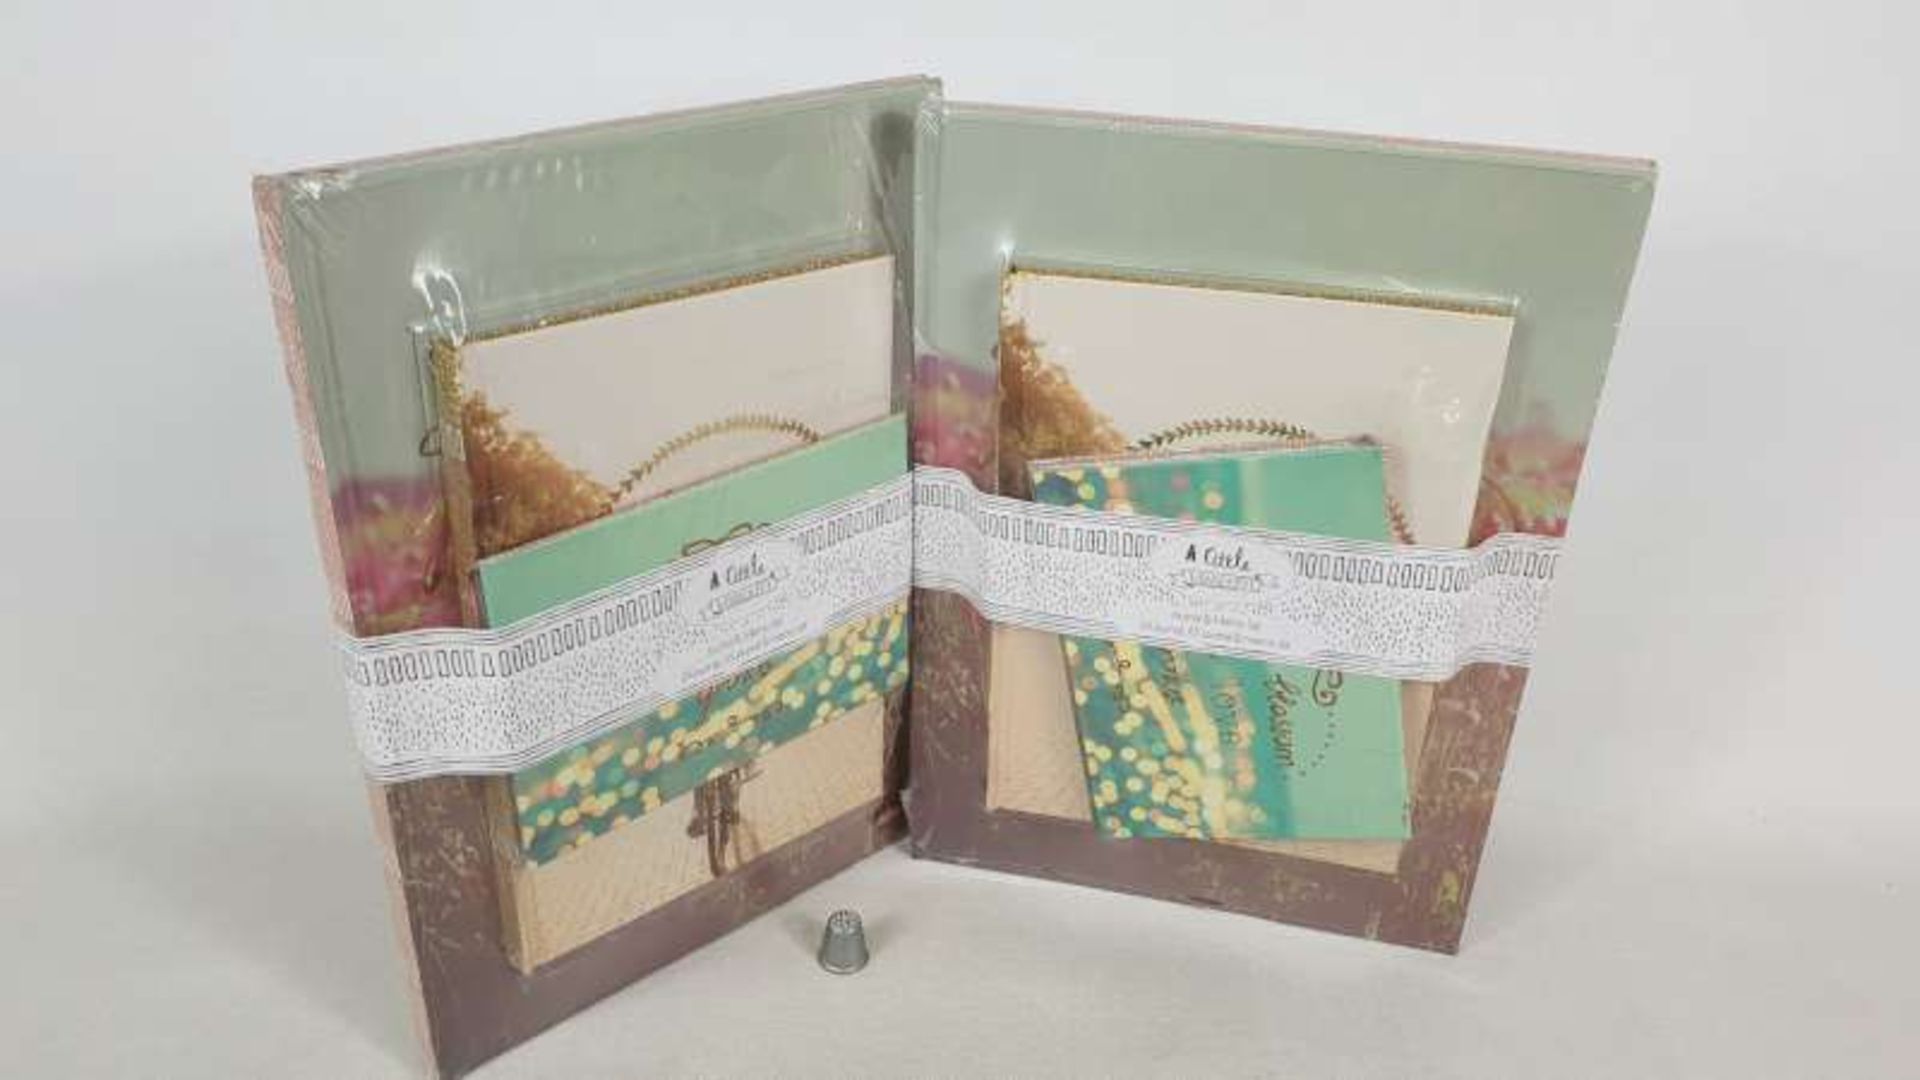 60 X A LITTLE WONDERFUL 3 X JOURNAL GIFT SETS IN 6 BOXES